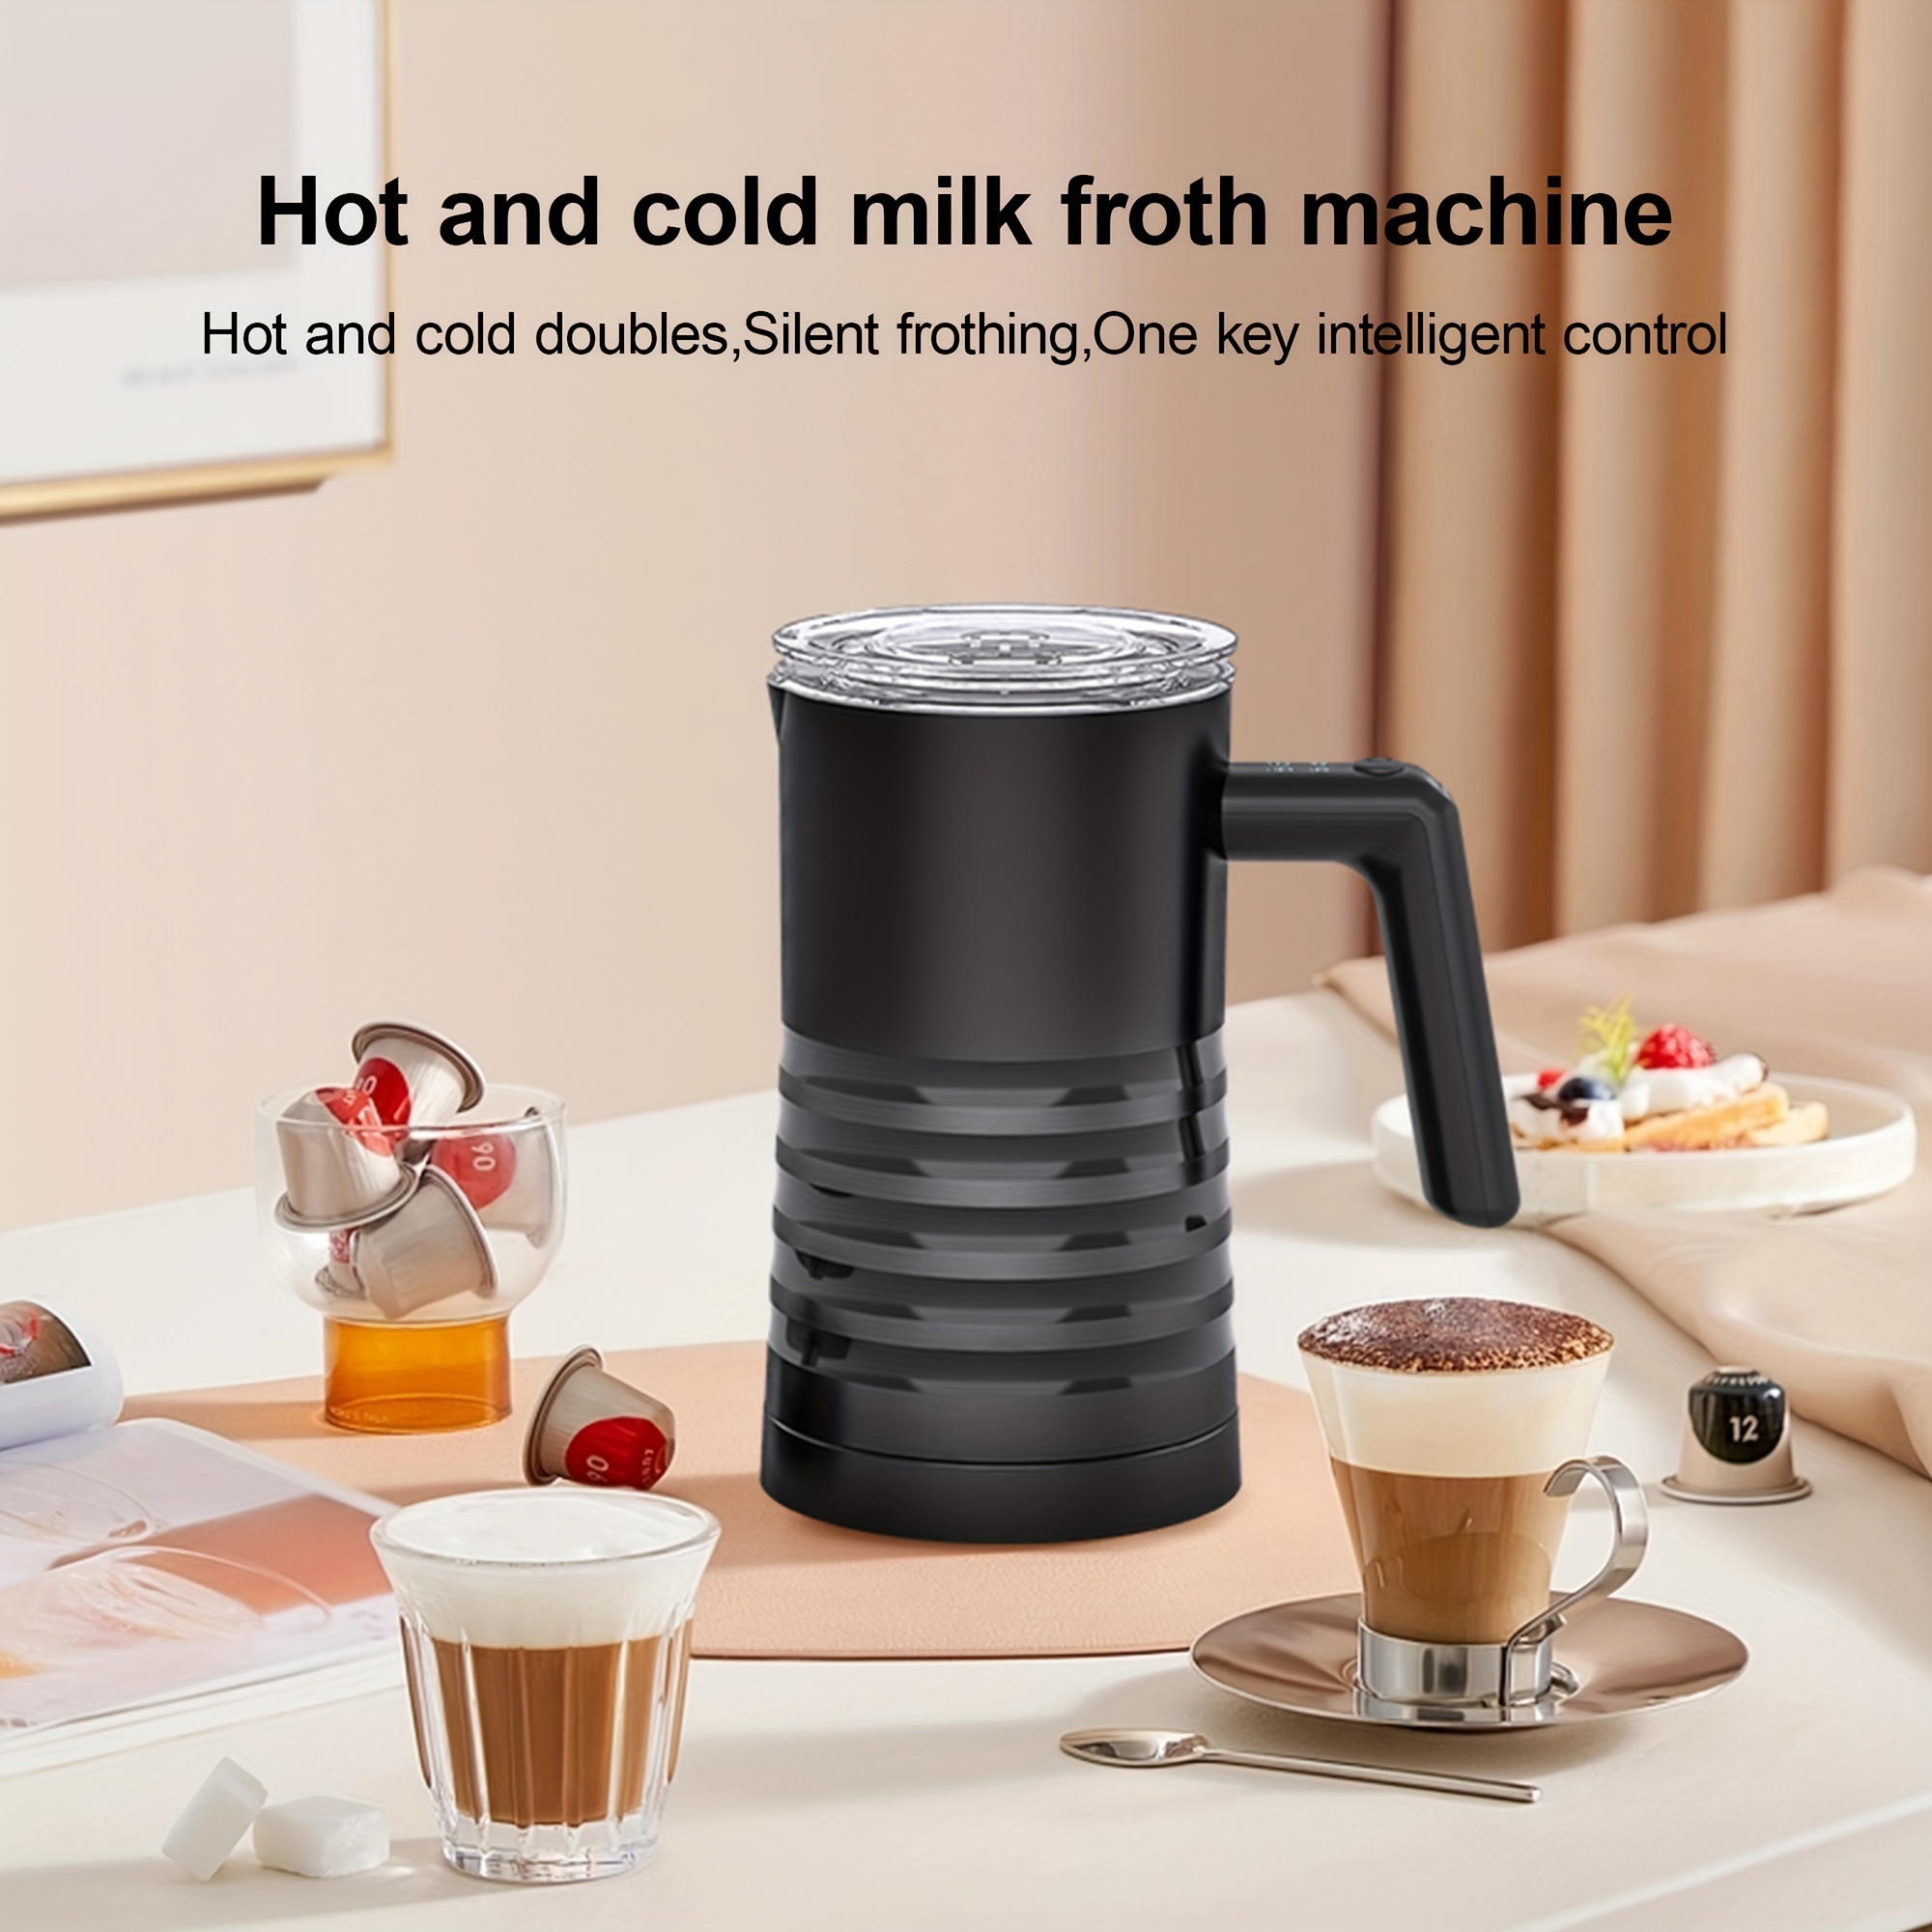 HiBREW 4 in 1 Multiple Capsule Coffee Maker Full Automatic With Hot & Cold  Milk Foaming Machine Frother & Plastic Tray Set